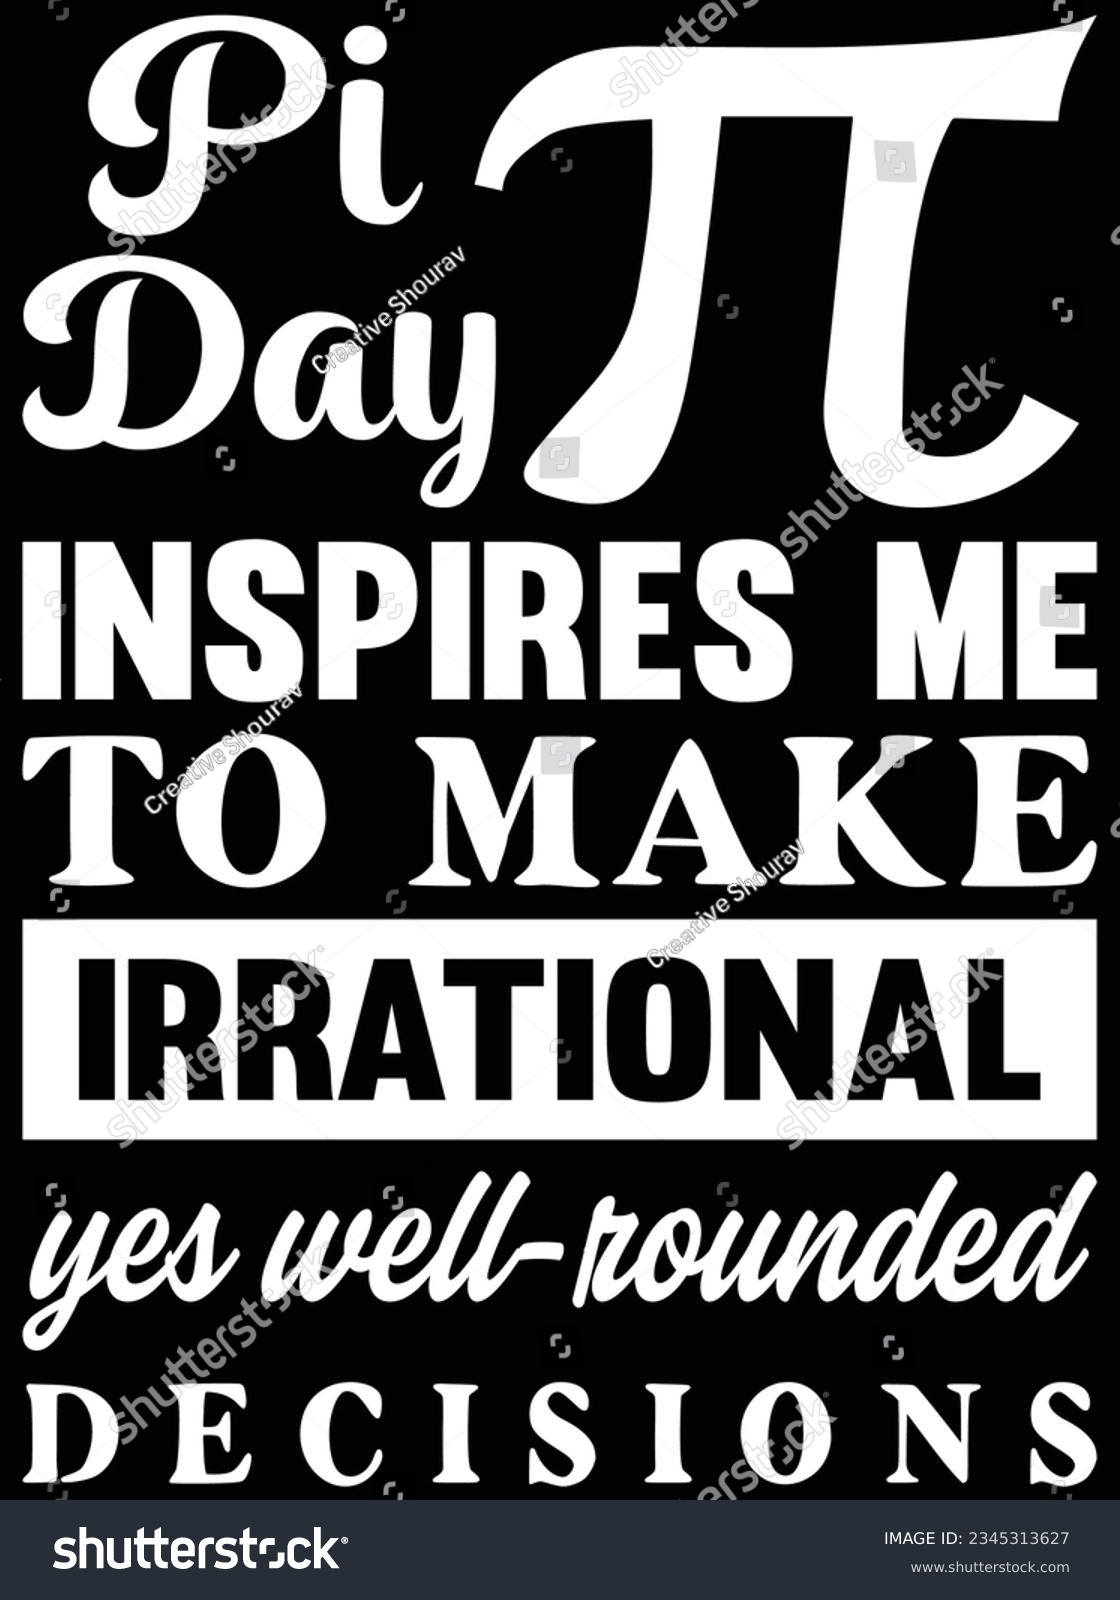 SVG of Pi day inspires me to make irrational yes well rounded decisions vector art design, eps file. design file for t-shirt. SVG, EPS cuttable design file svg